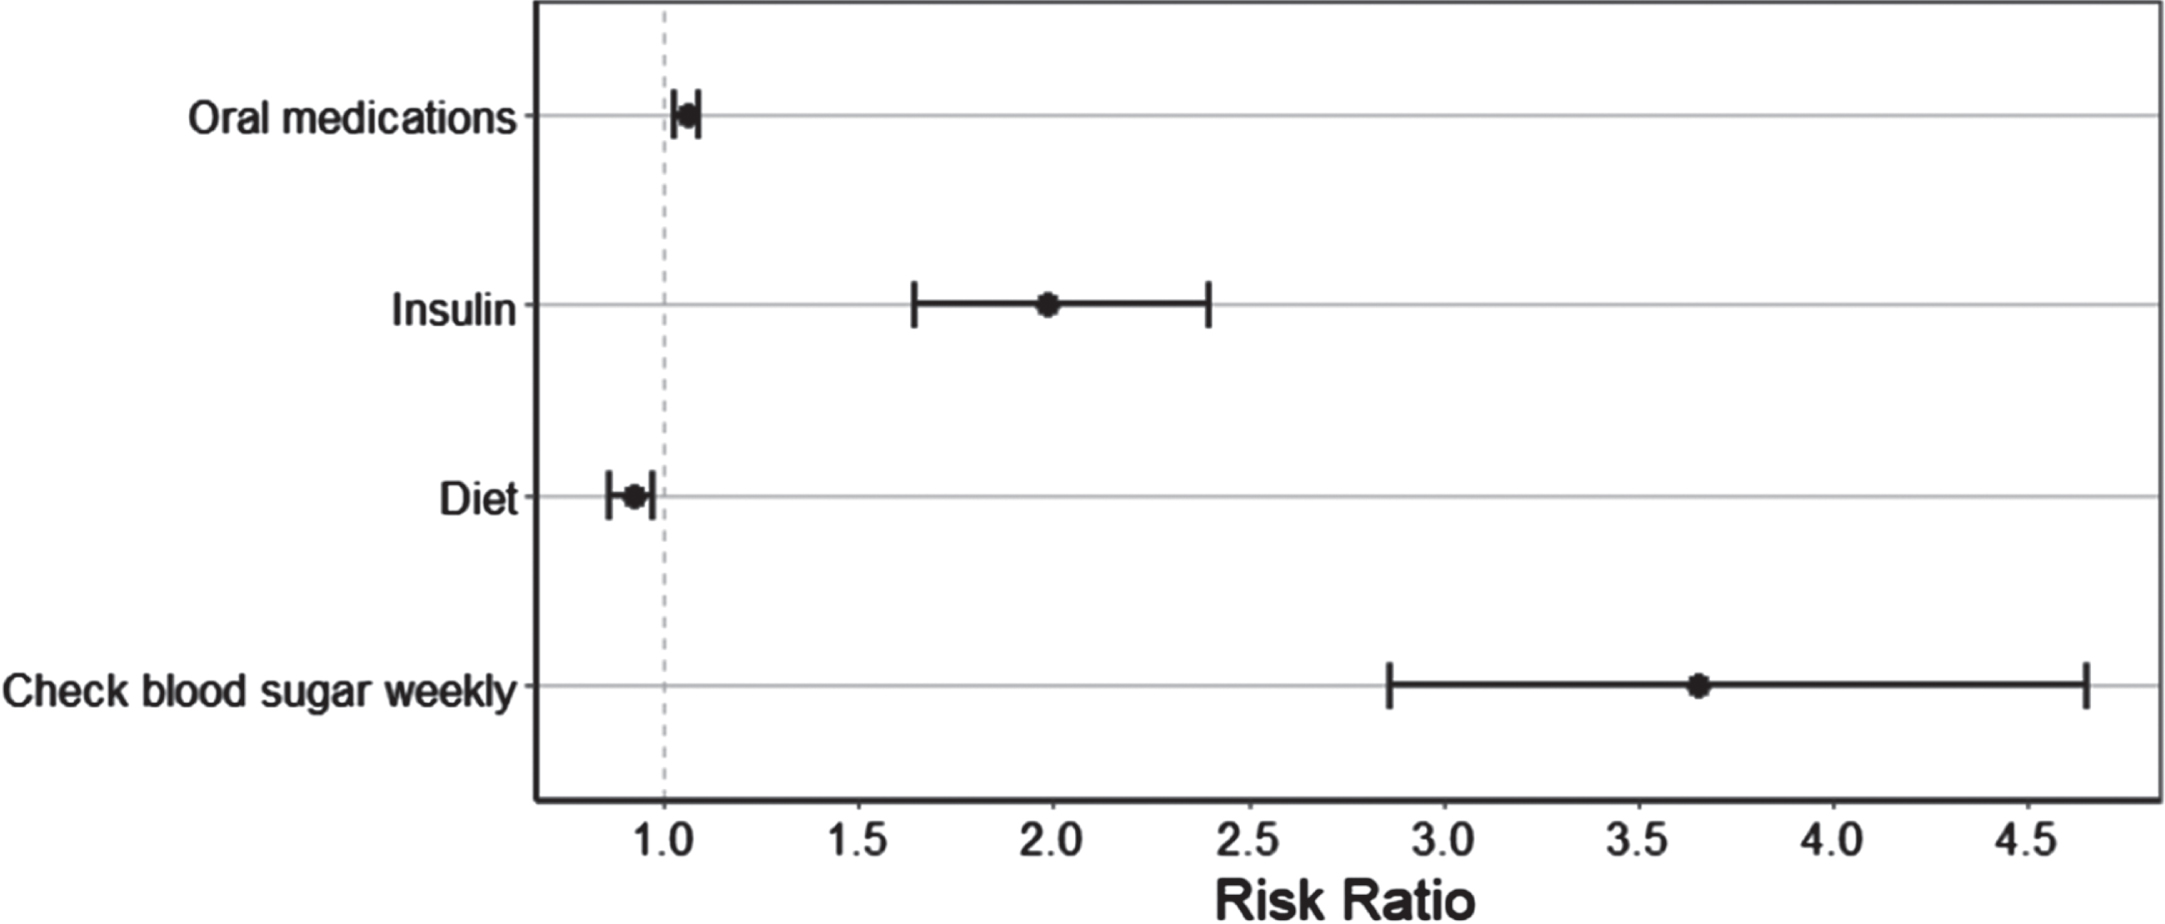 Adjusted risk ratios for the use of oral medications, insulin, diet, and weekly blood glucose checks for adults with self-reported diabetes aged ≥60 years in 2018 compared to adults aged ≥60 years in 2001. RR estimated from generalized estimating equation models with clustering by participant, exchangeable correlation structure, and a log link function. Oral medication, insulin, diet, and check blood glucose were modeled separately. All analyses adjusted for demographic characteristics, health behaviors, and self-reported health conditions.